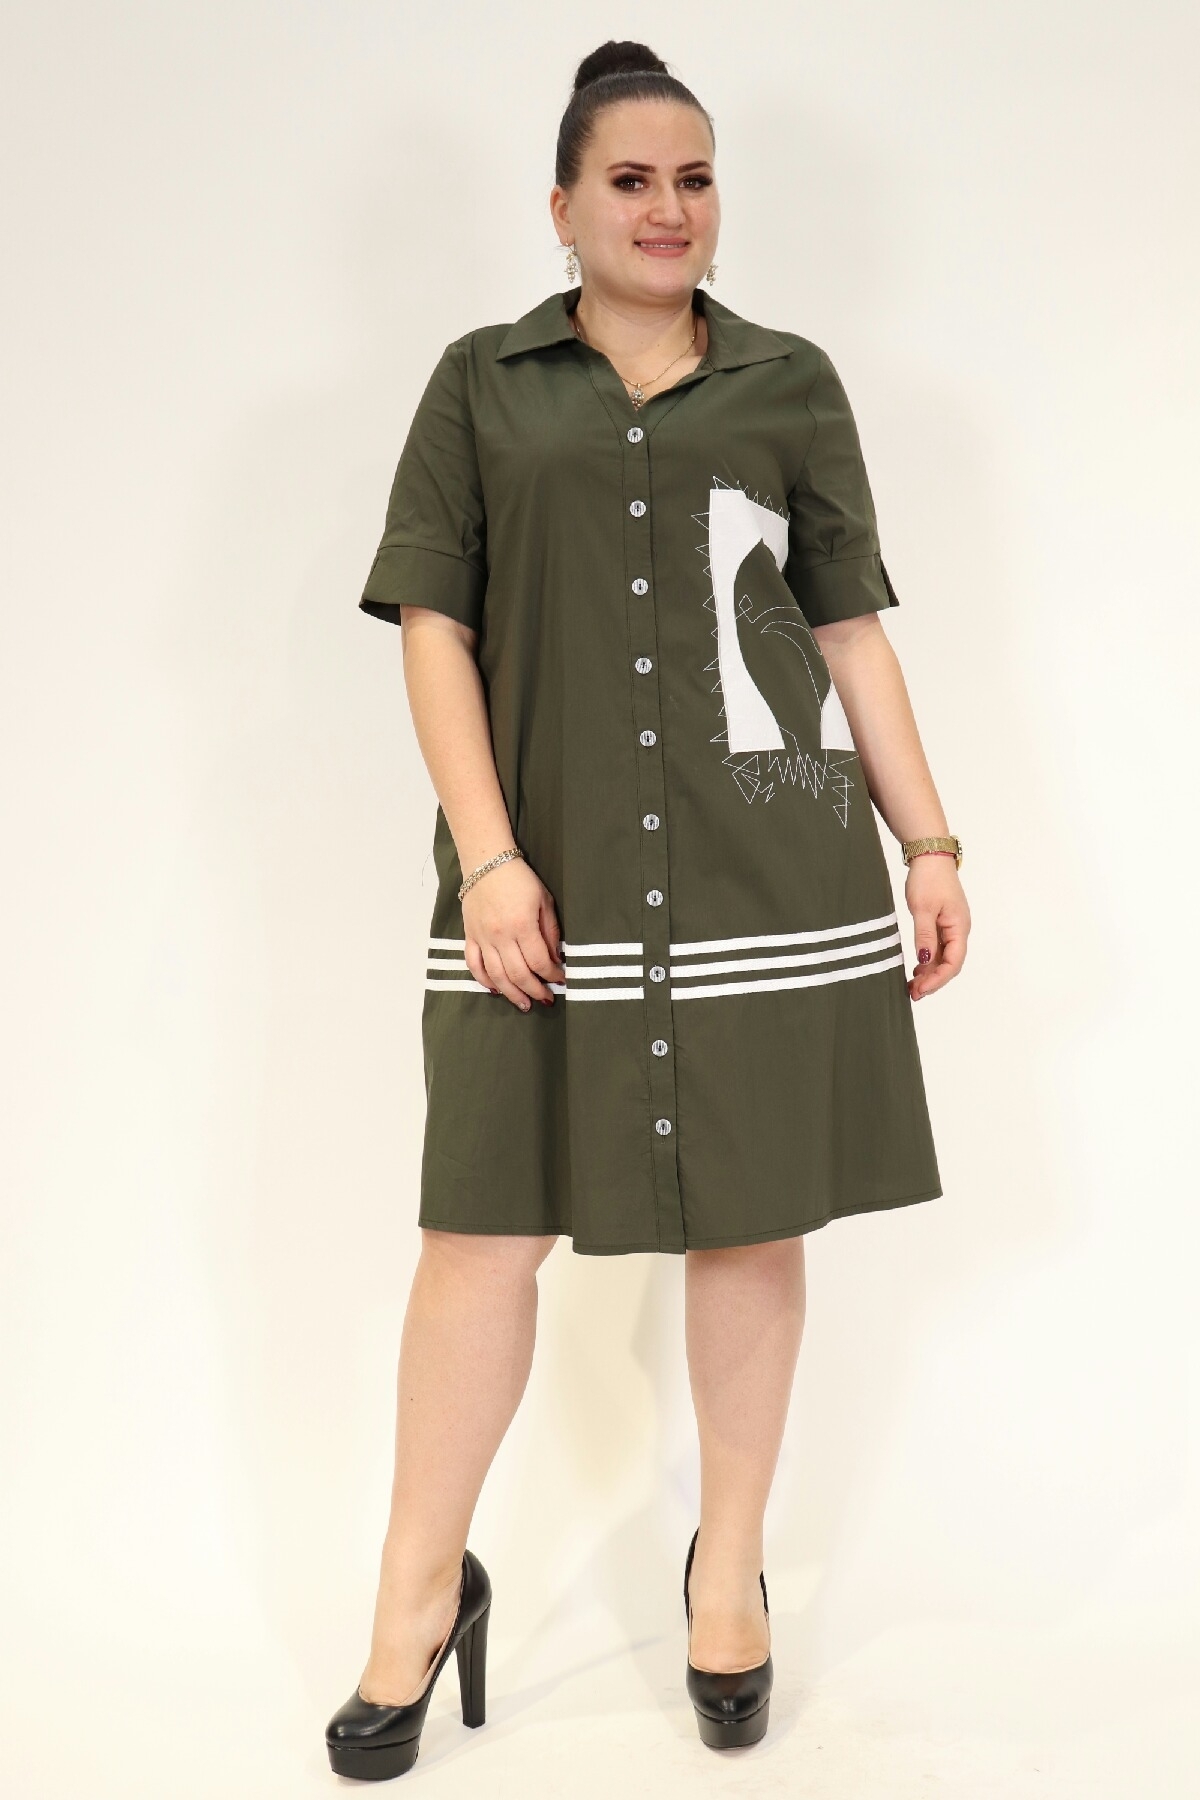 Short sleeve dress with flared button up dress with short sleeves and pockets